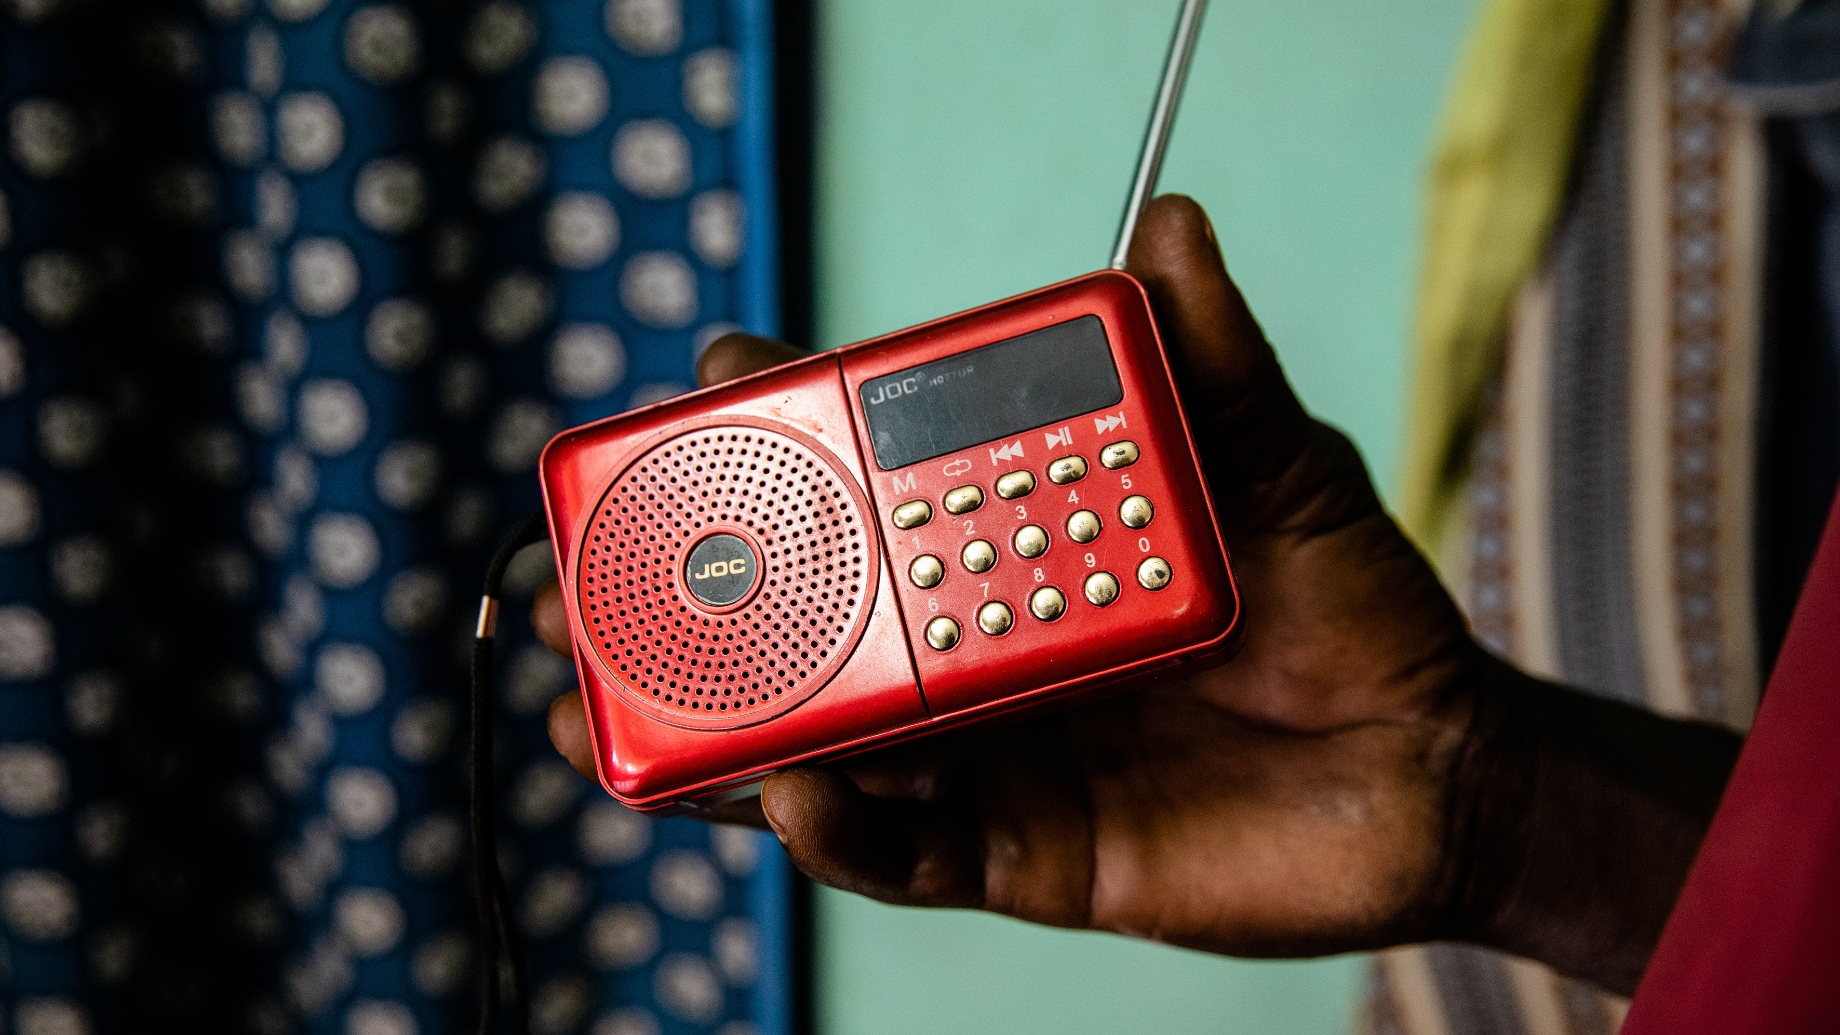 Man's hand holding red radio in front of turquoise wall and polka dot curtain